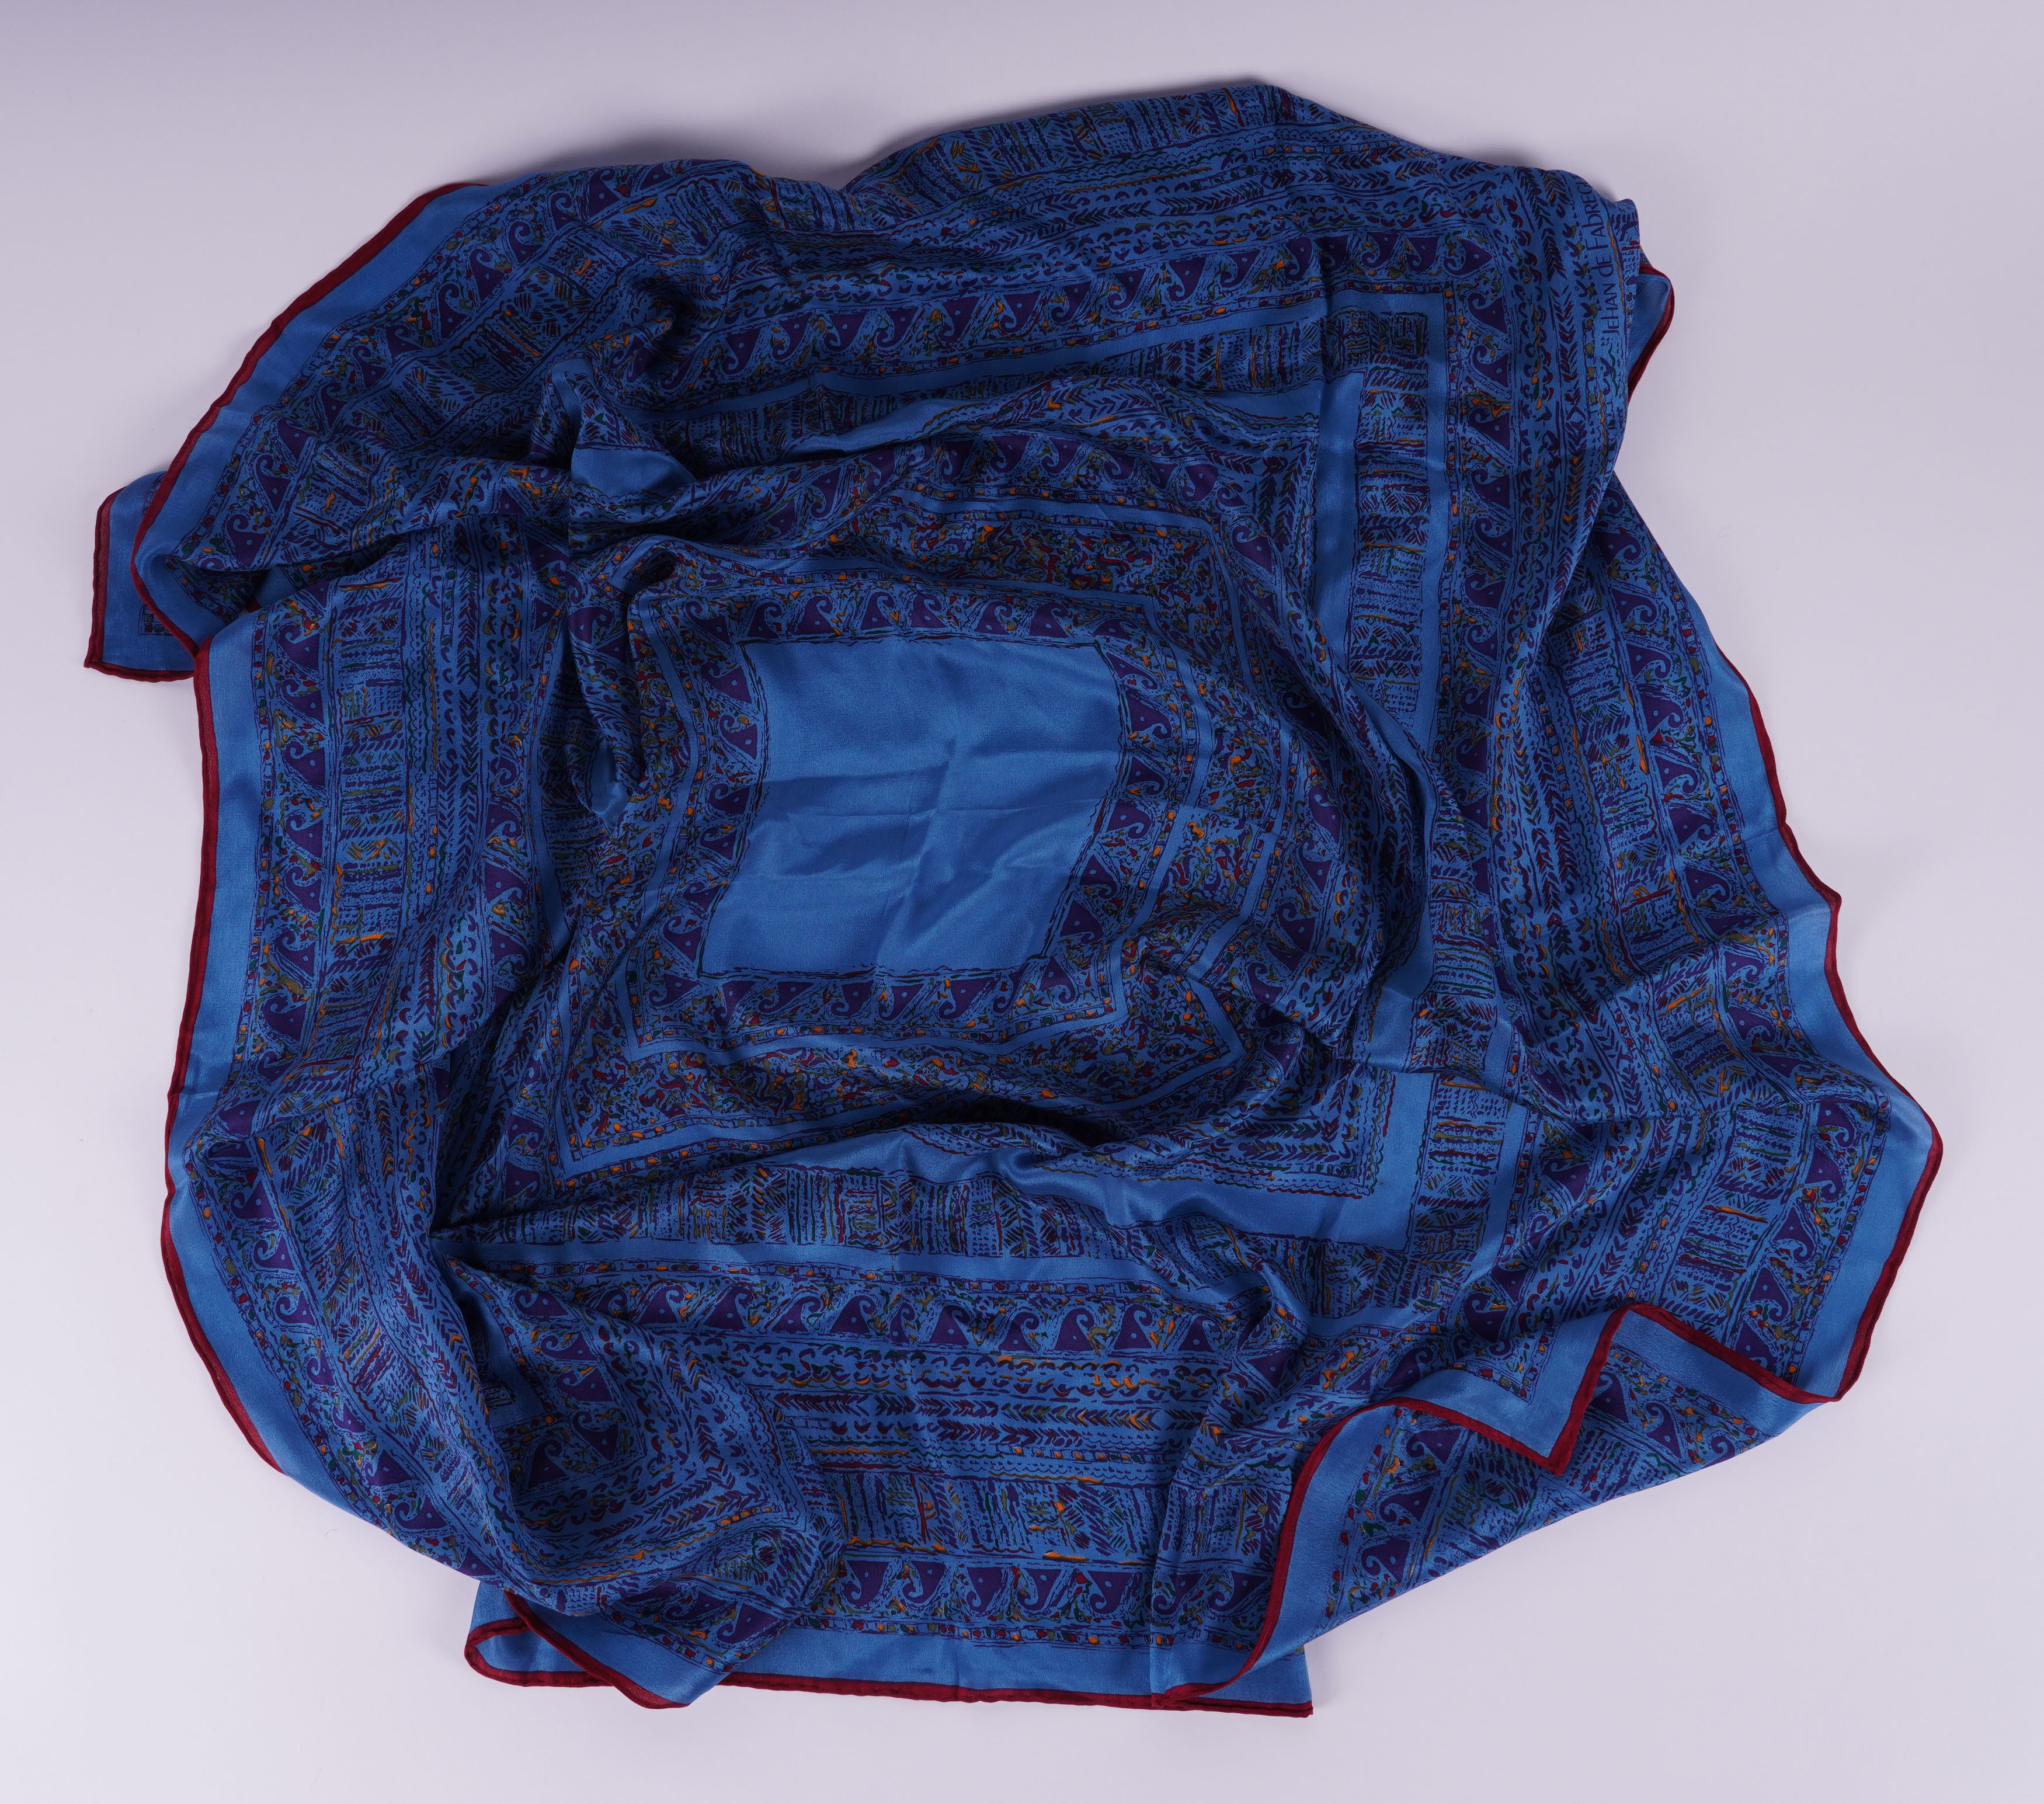 HERMES: 'GRAND UNIFORM' SILK SCARF BY JOACHIM METZ; TOGETHER WITH THREE OTHER SCARVES (4) - Image 3 of 7